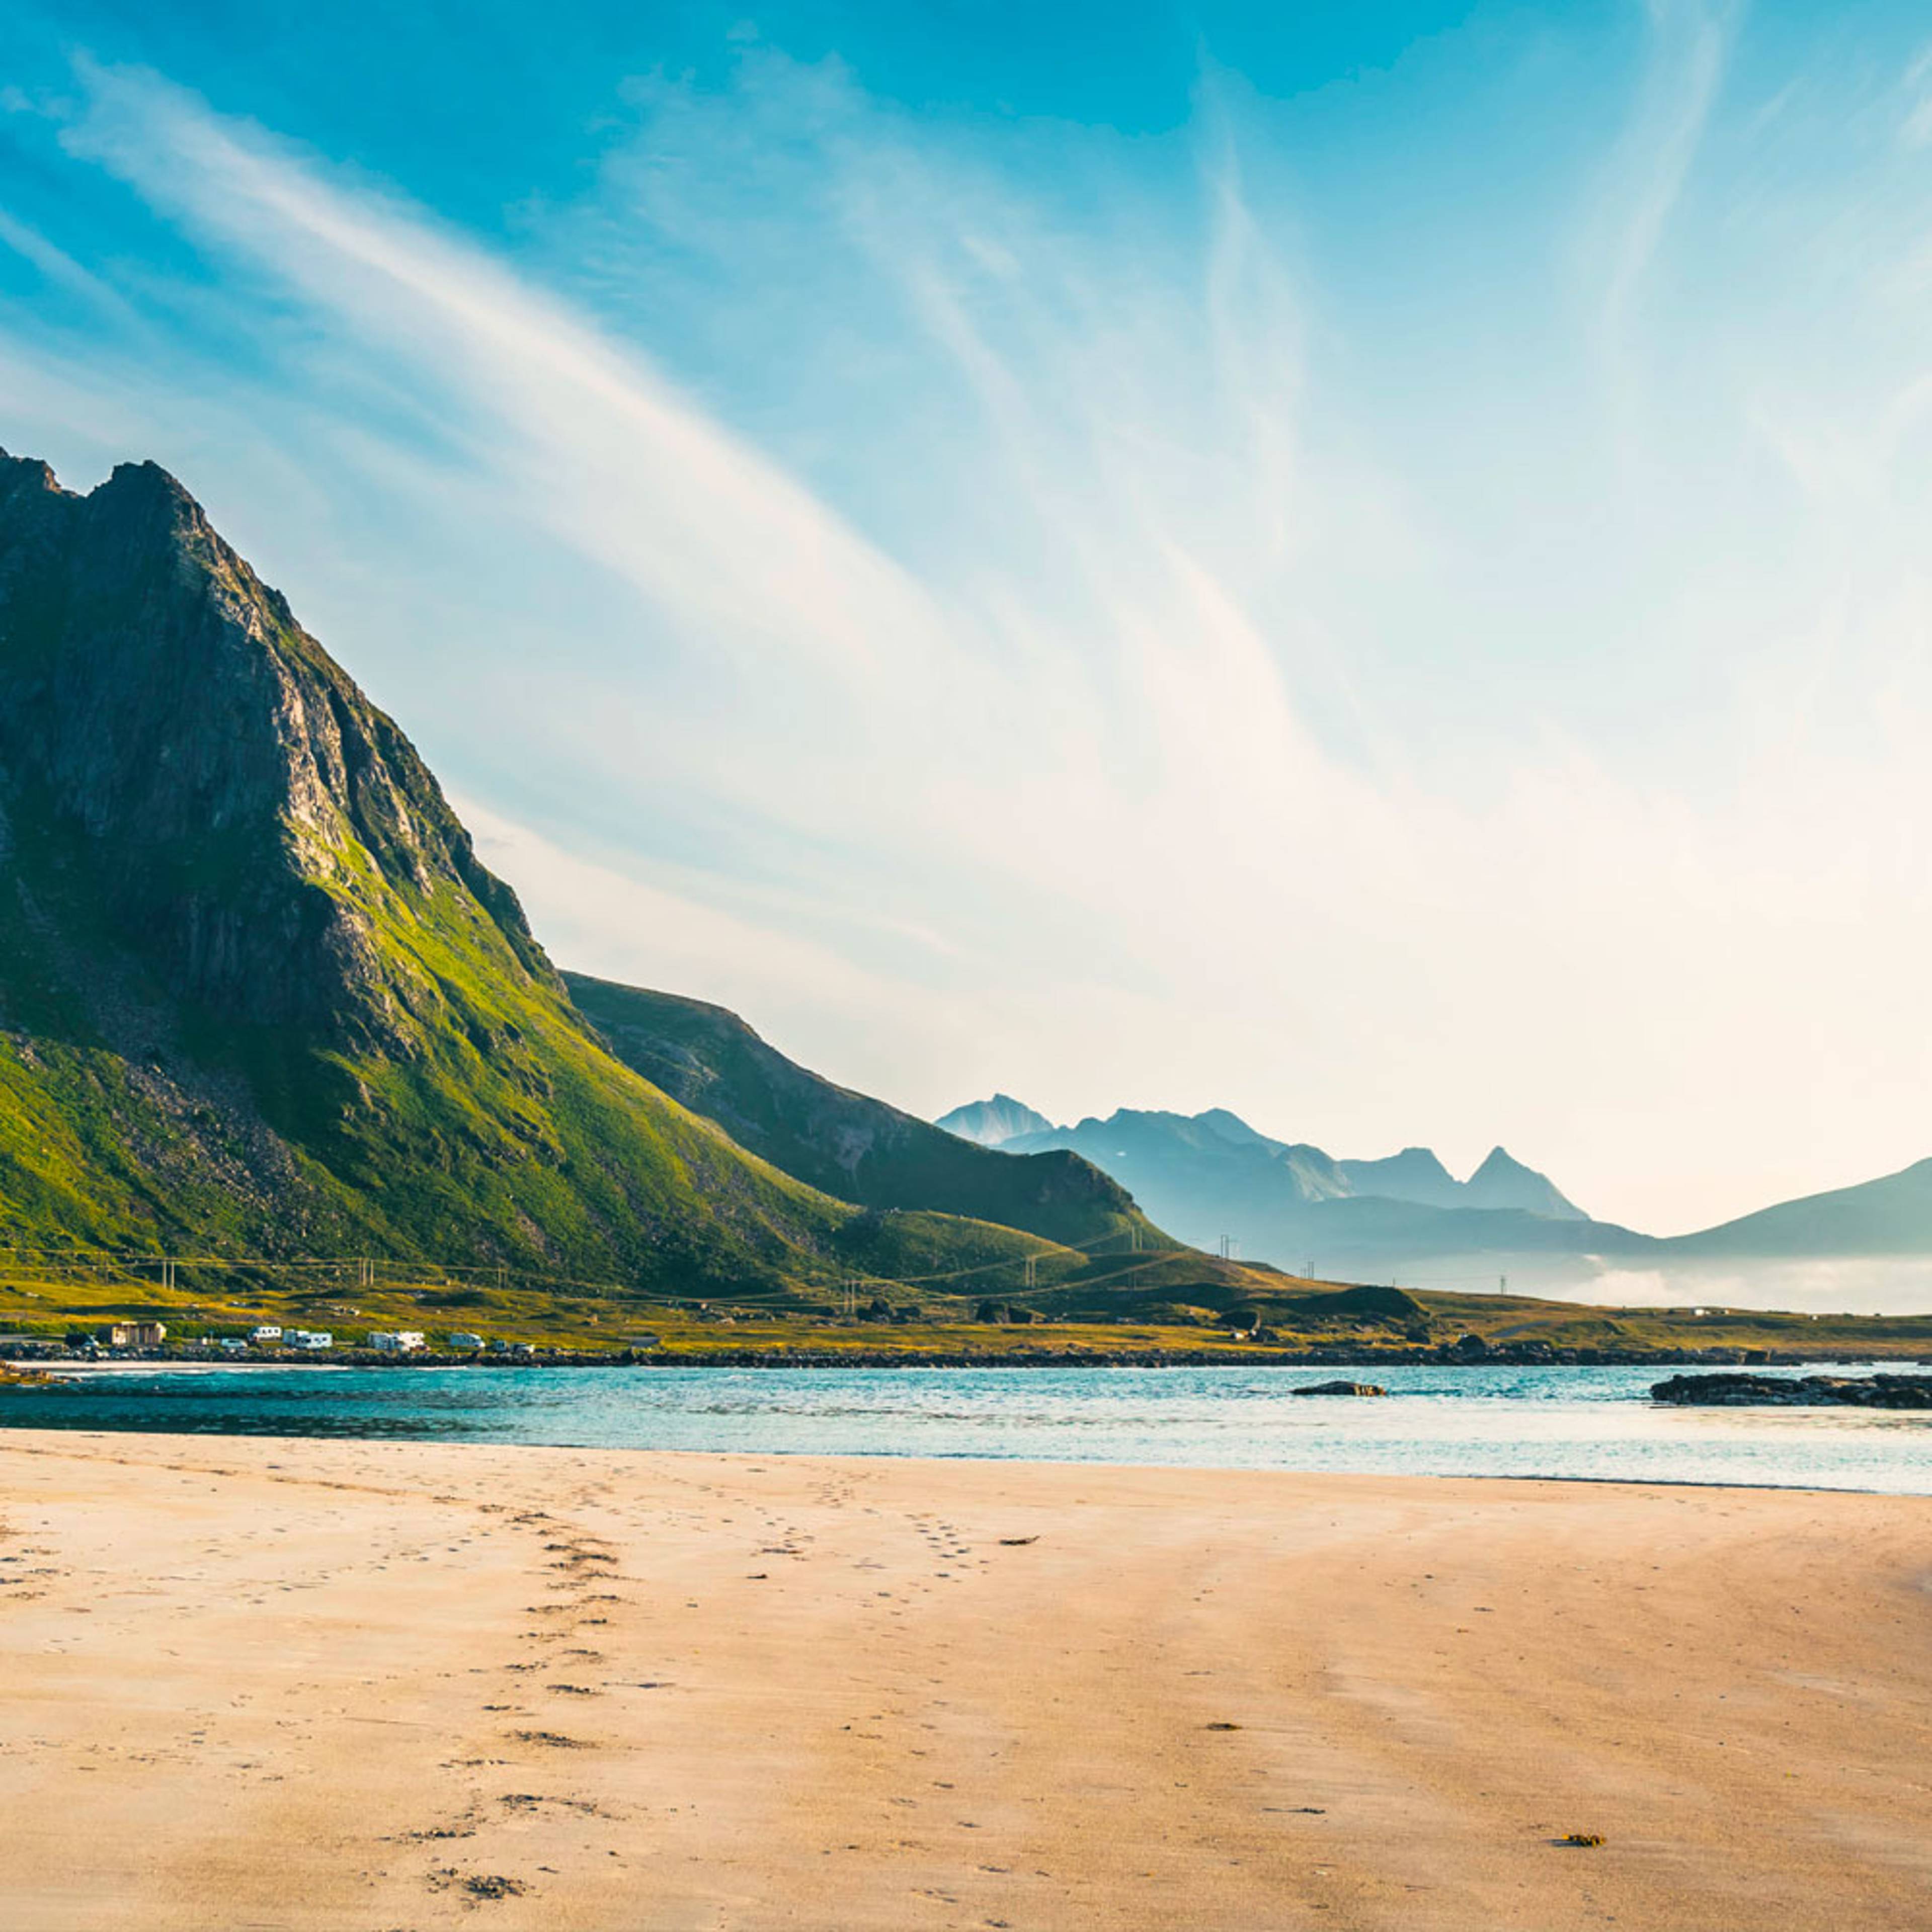 Design your perfect tour of Norway's beaches with a local expert